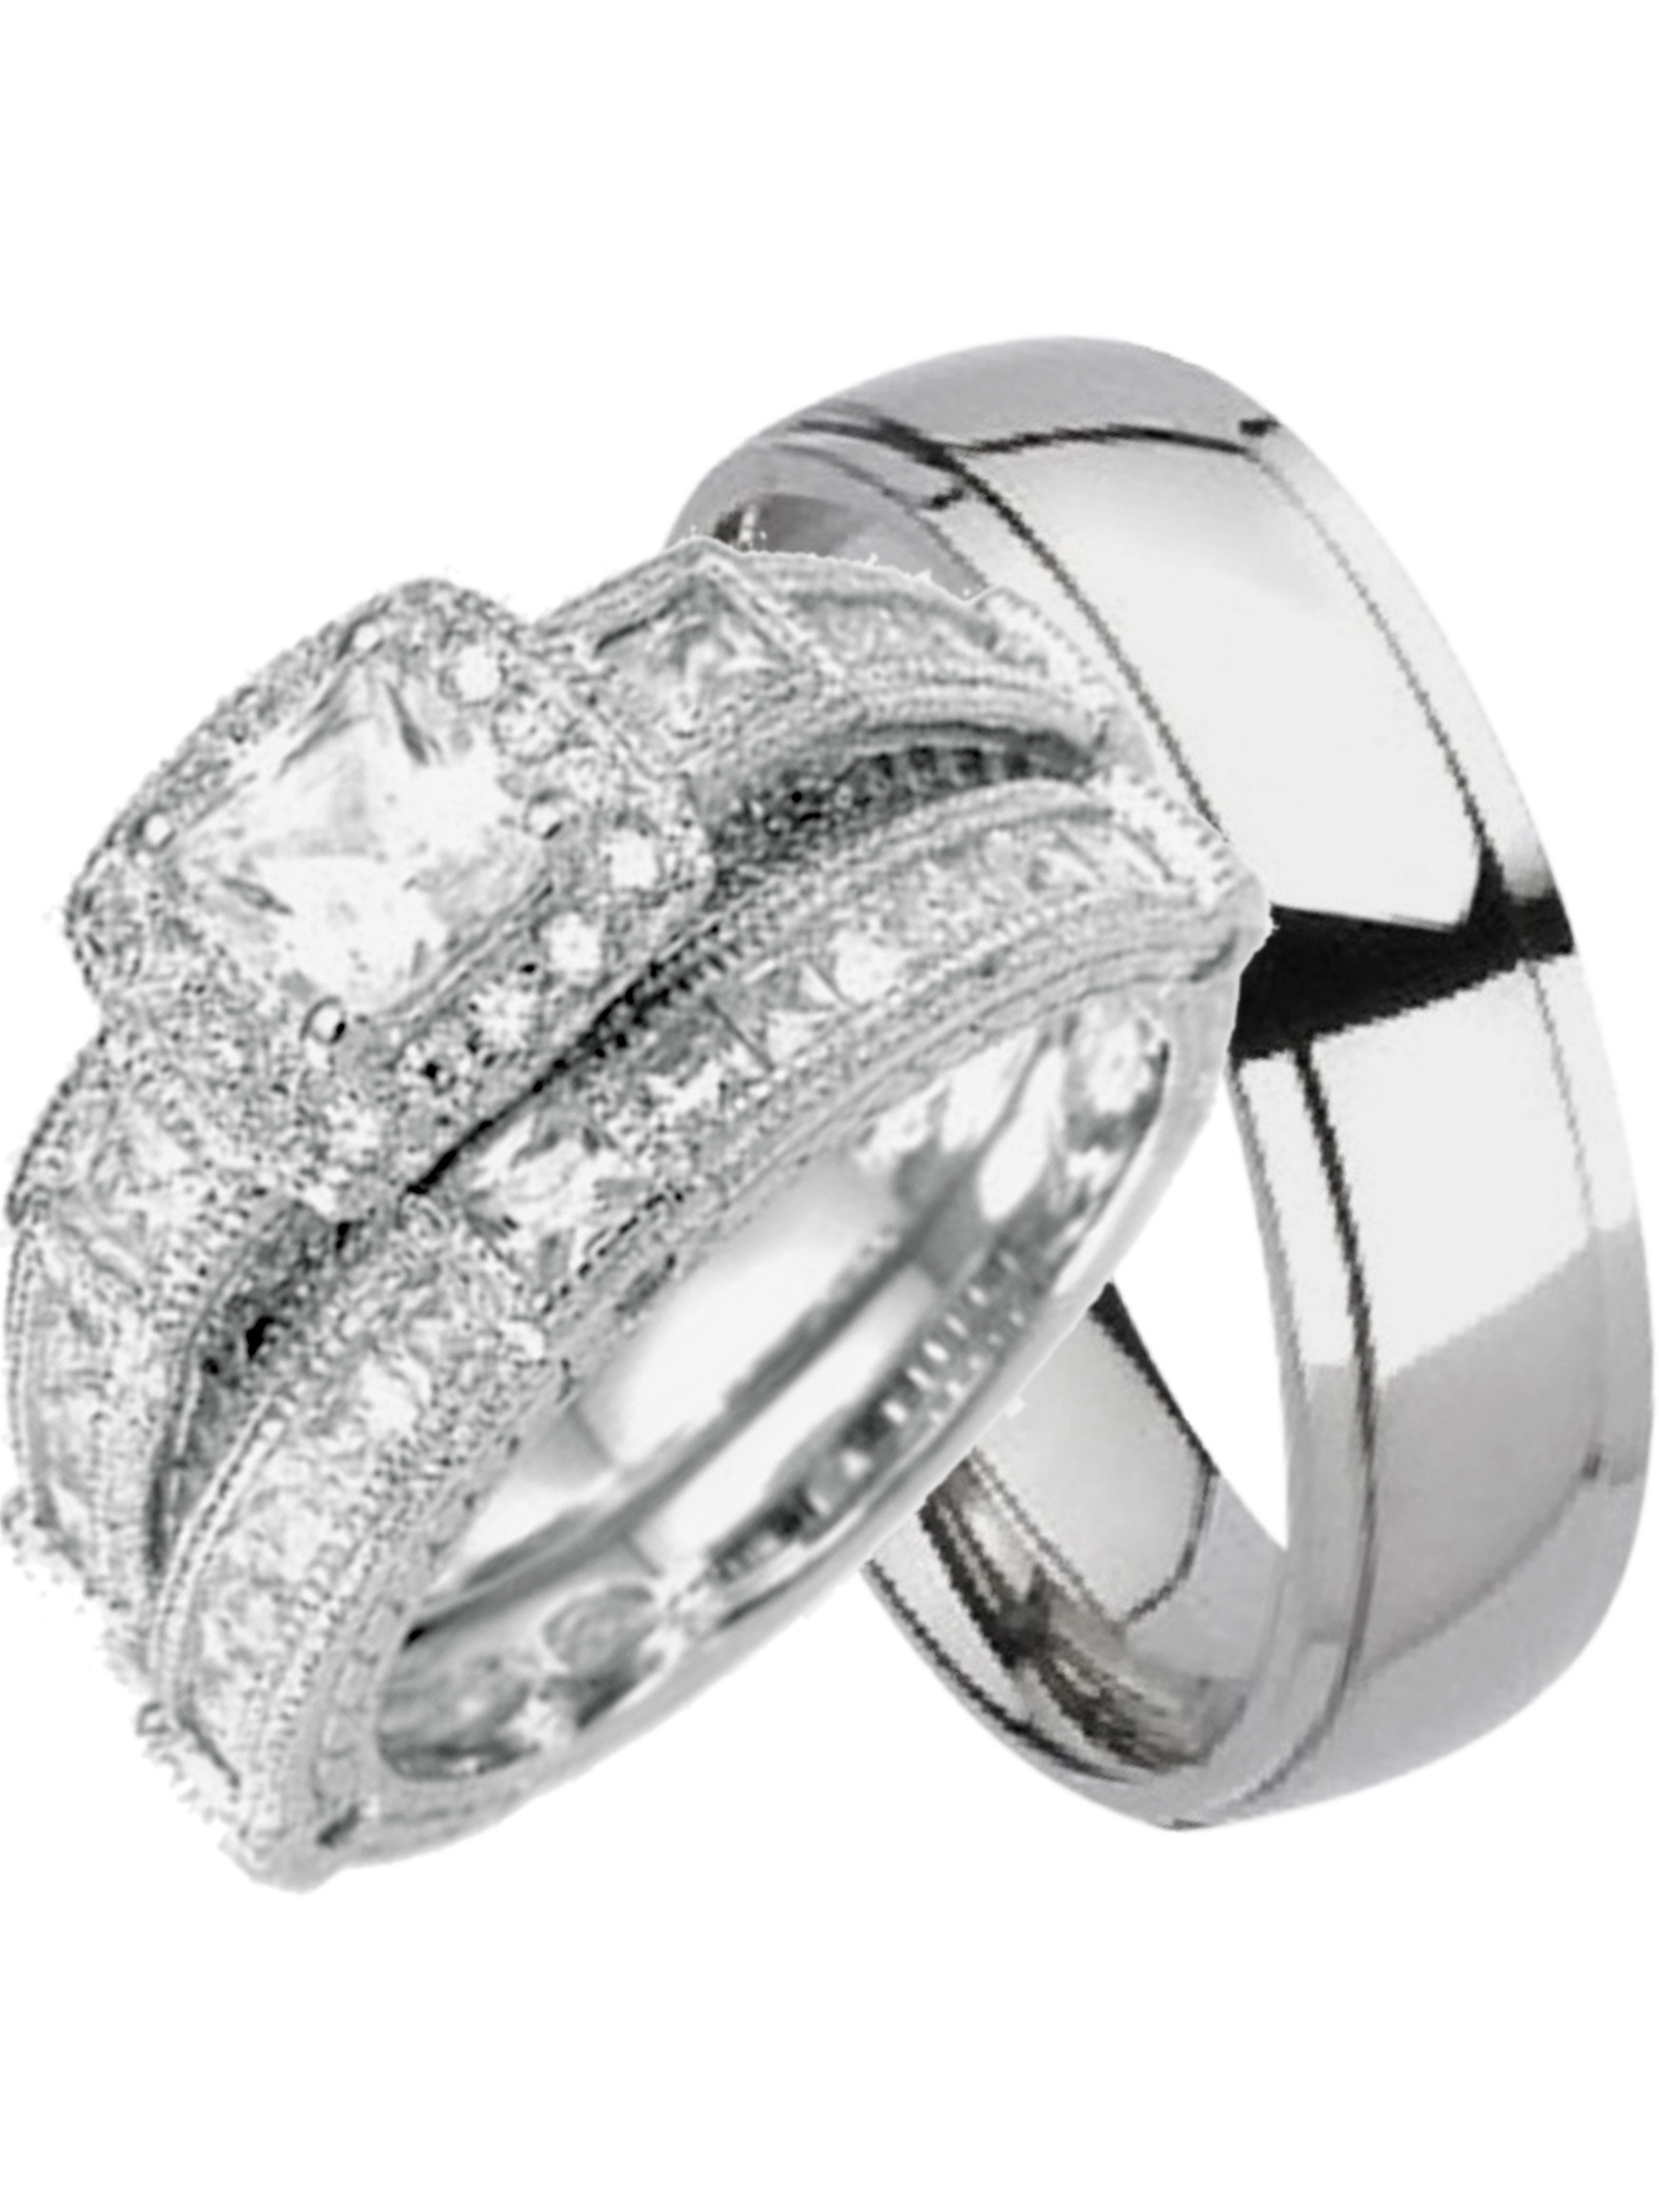 Wedding Band Sets For Him And Her
 LaRaso & Co His and Hers Wedding Sets Silver Titanium 3